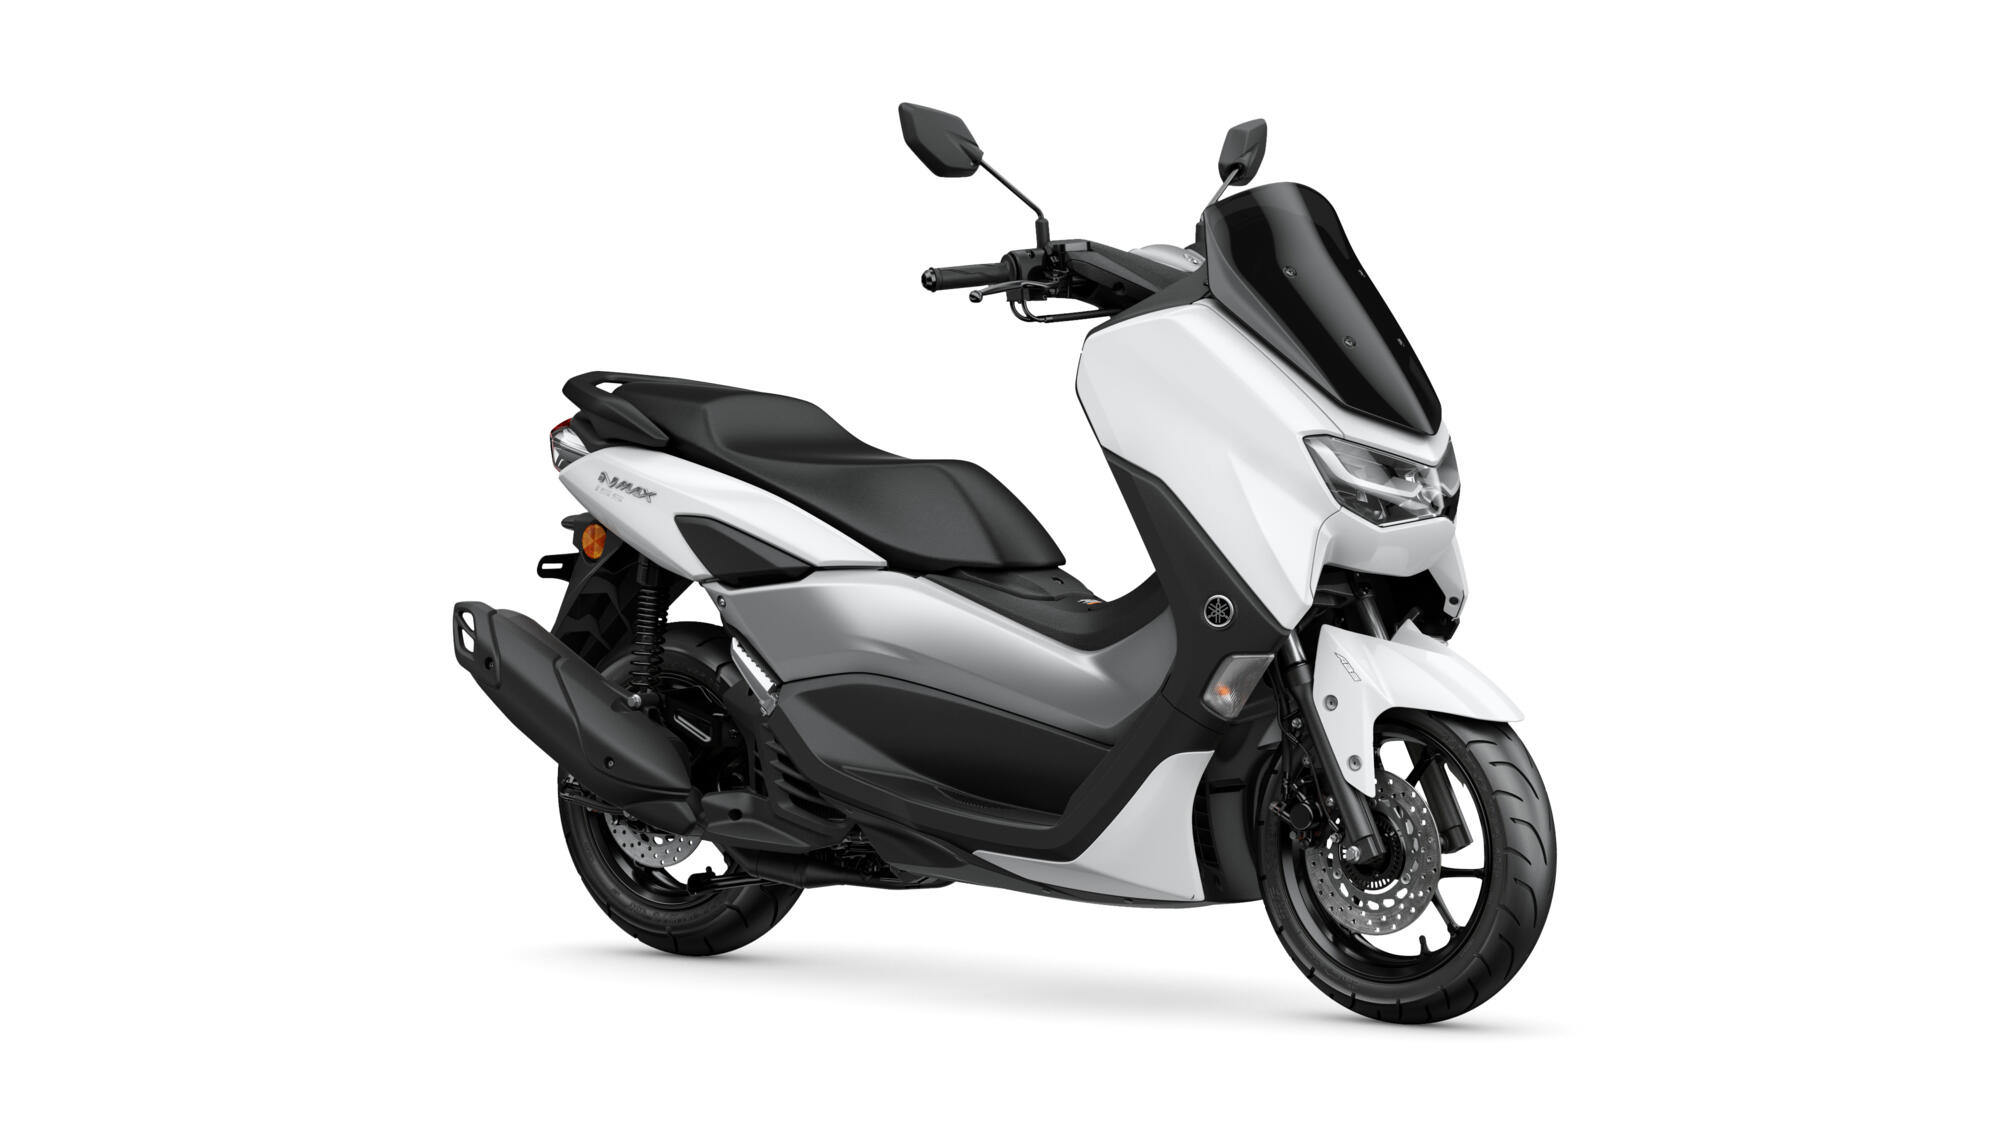 YAMAHA N-MAX 155 - ONE WITH THE CITY:
Its sporty body design comes with the latest LED lights and features an aerodynamic front fairing that gives increased protection from the wind and rain – while the new frame ensures easier manoeuvrability in traffic and provides a more comfortable and relaxed riding position.